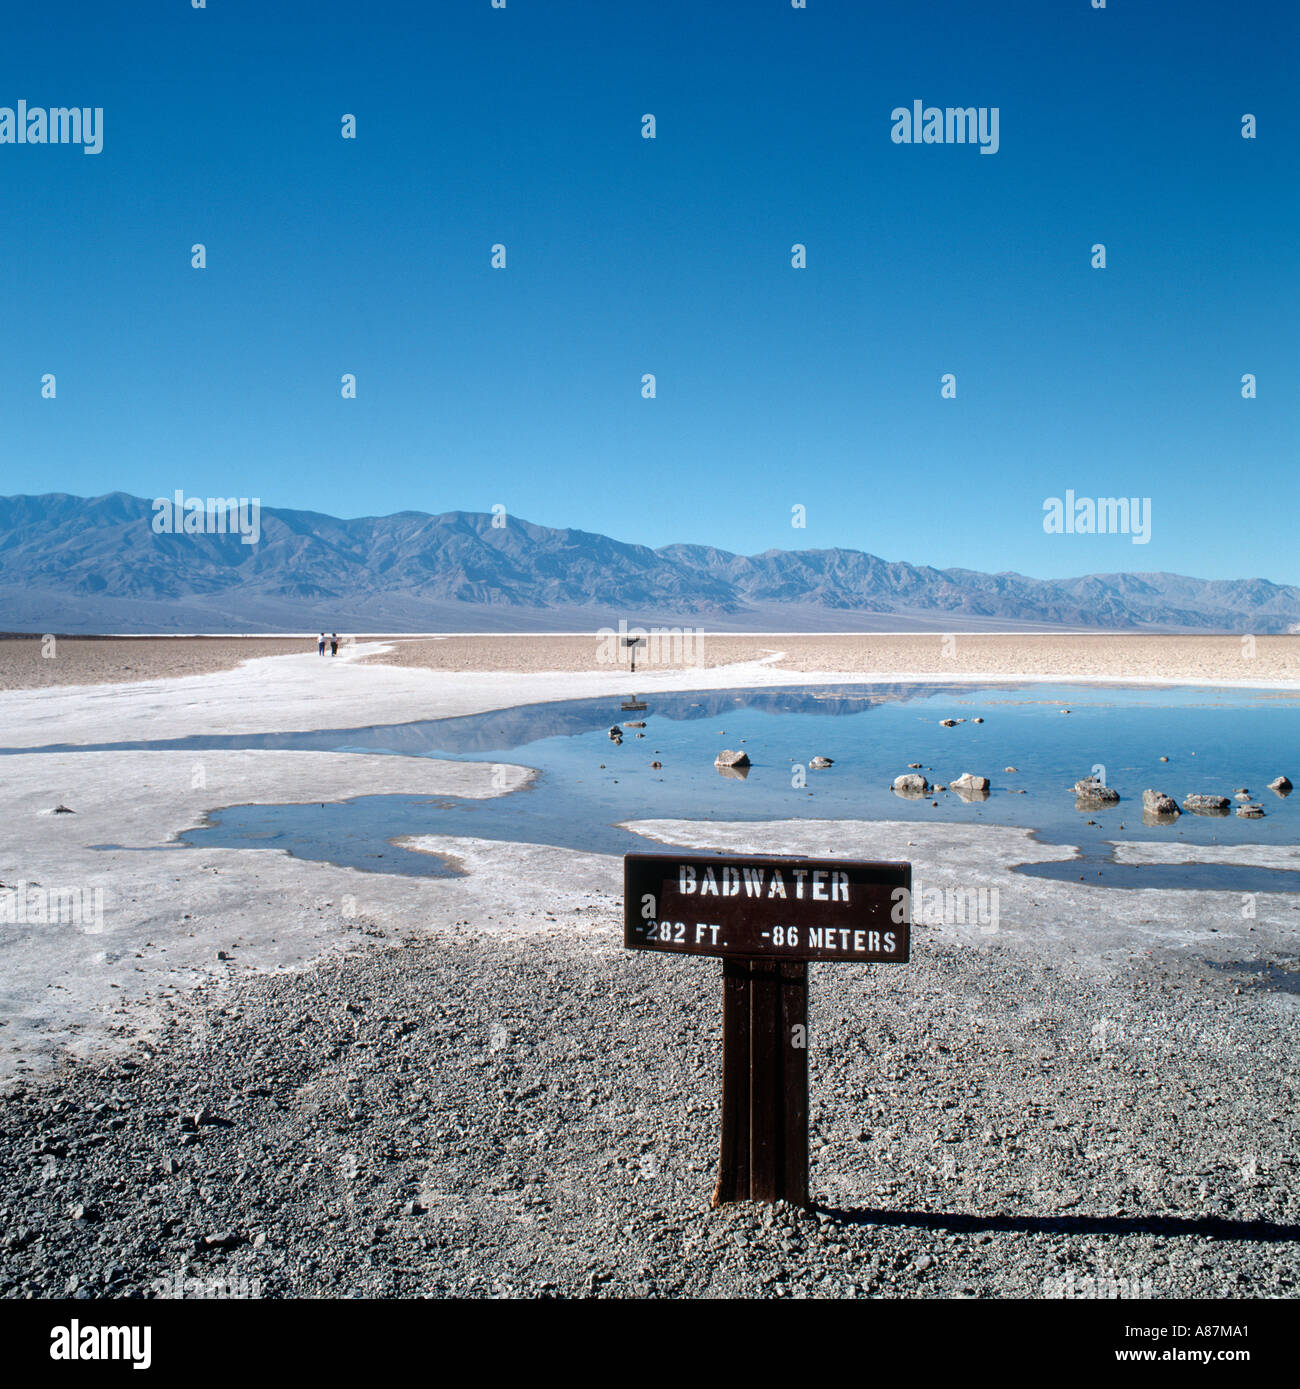 Badwater, the lowest point in the continental US at 282ft, Death Valley, California, USA Stock Photo